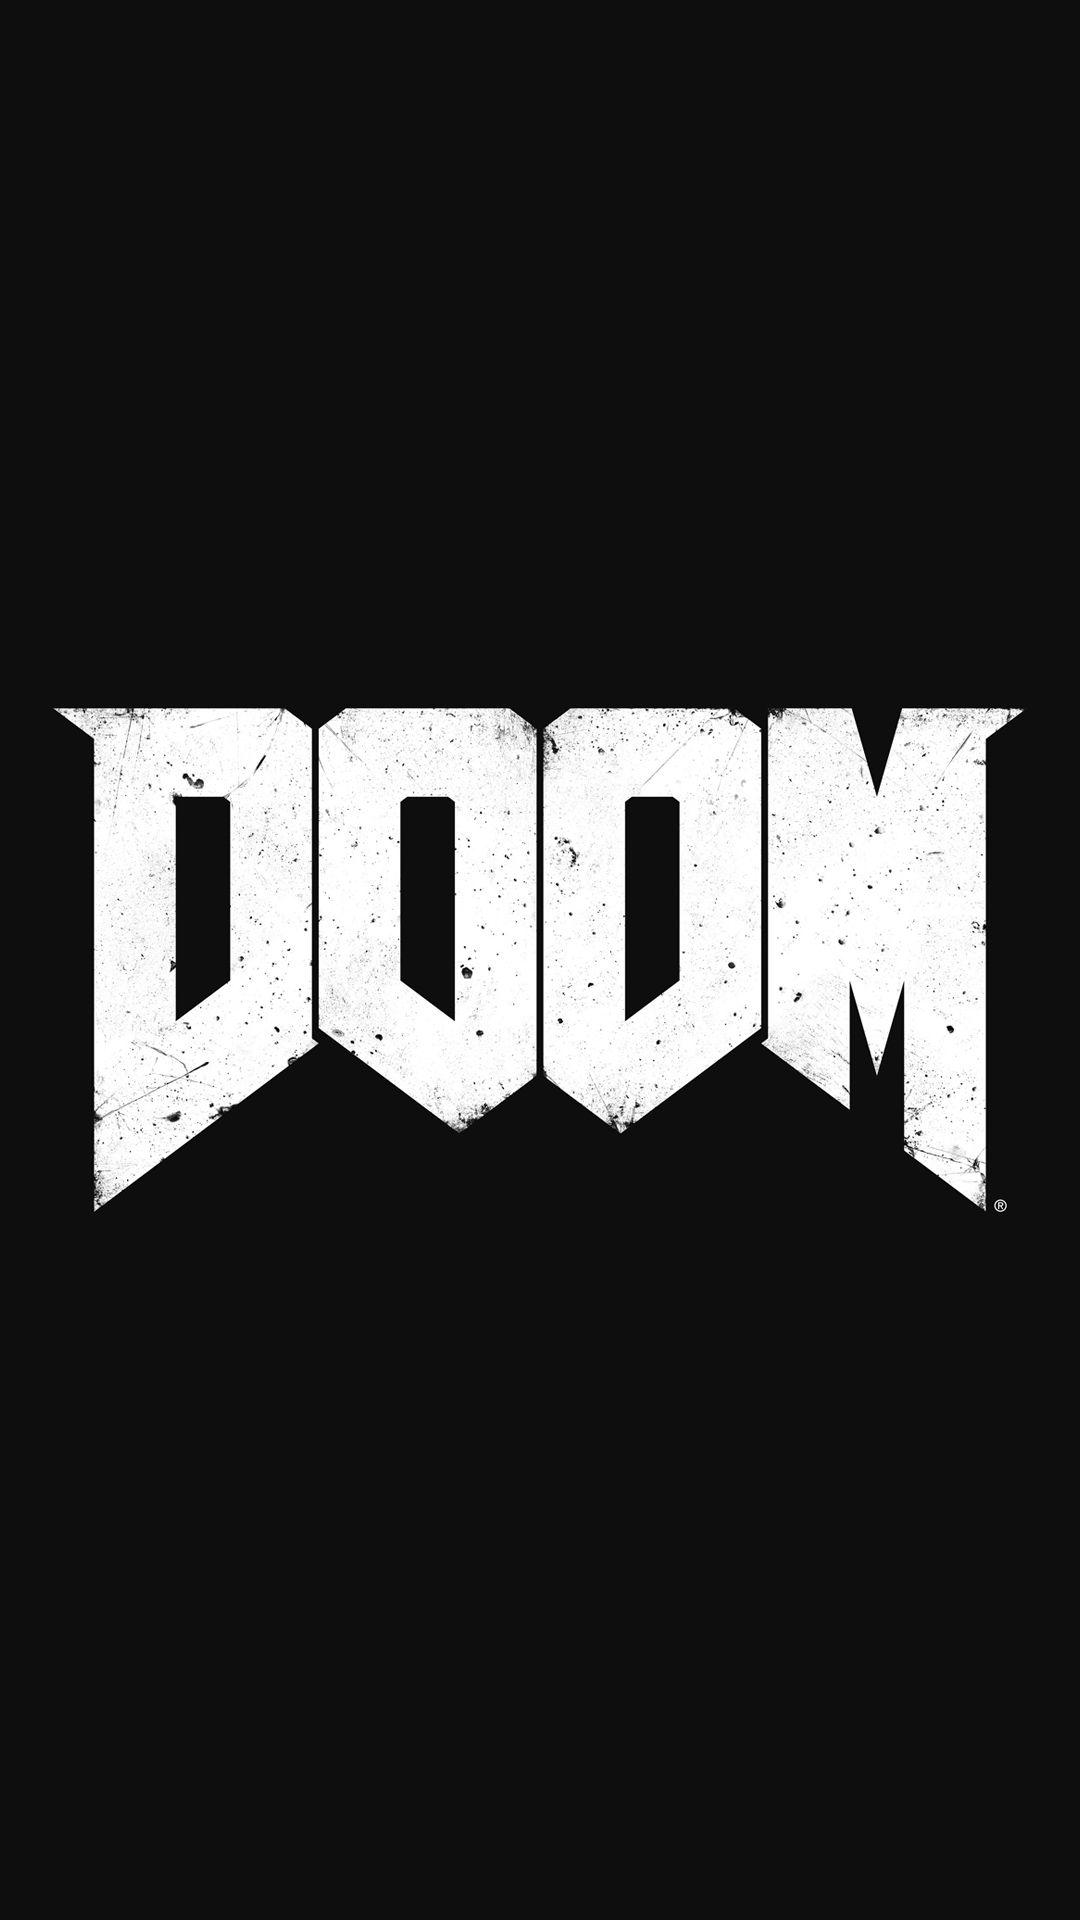 DOOM Logo Shooter Game Android Wallpaper free download